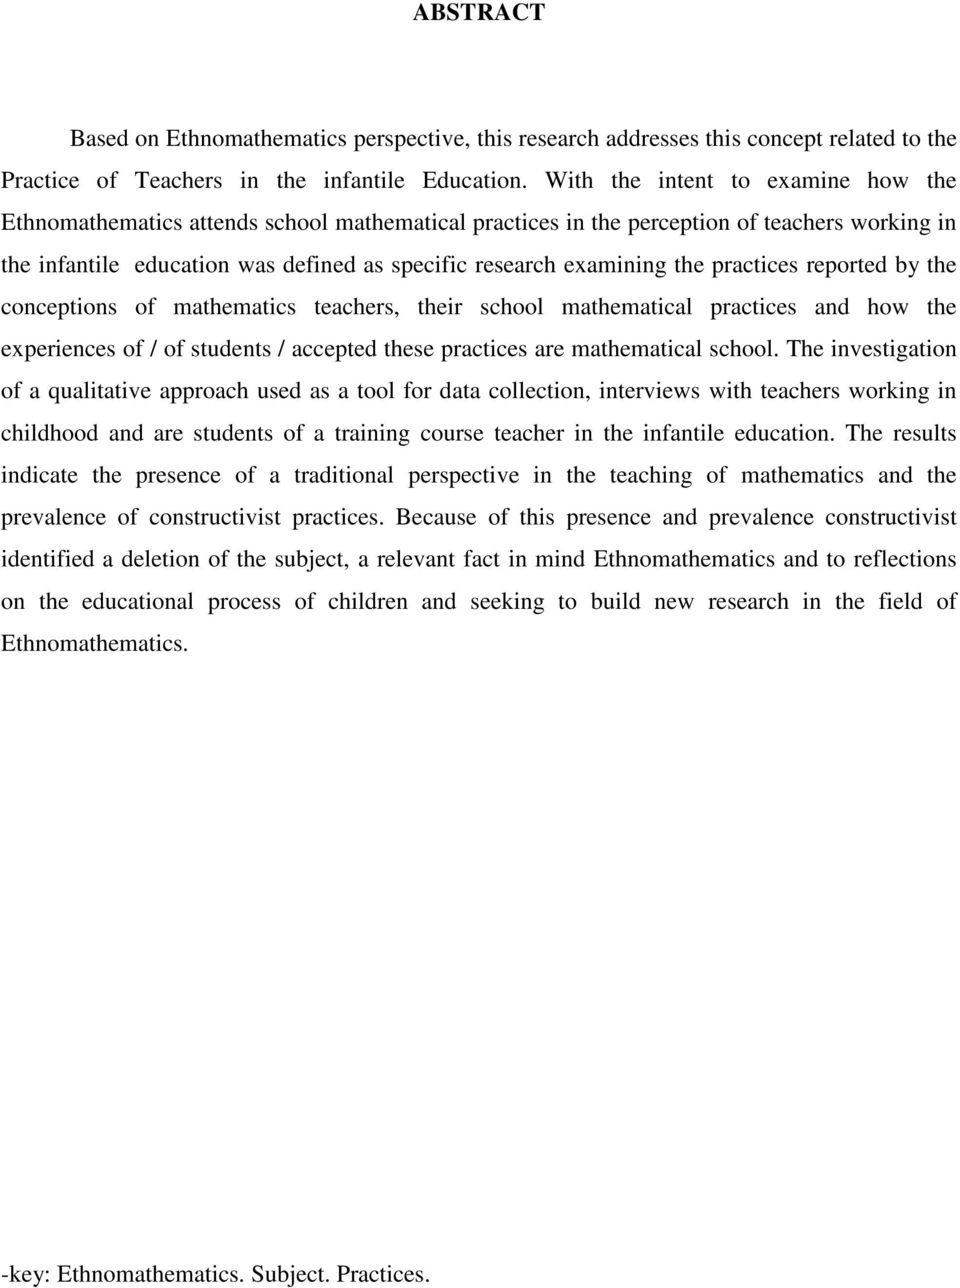 the practices reported by the conceptions of mathematics teachers, their school mathematical practices and how the experiences of / of students / accepted these practices are mathematical school.